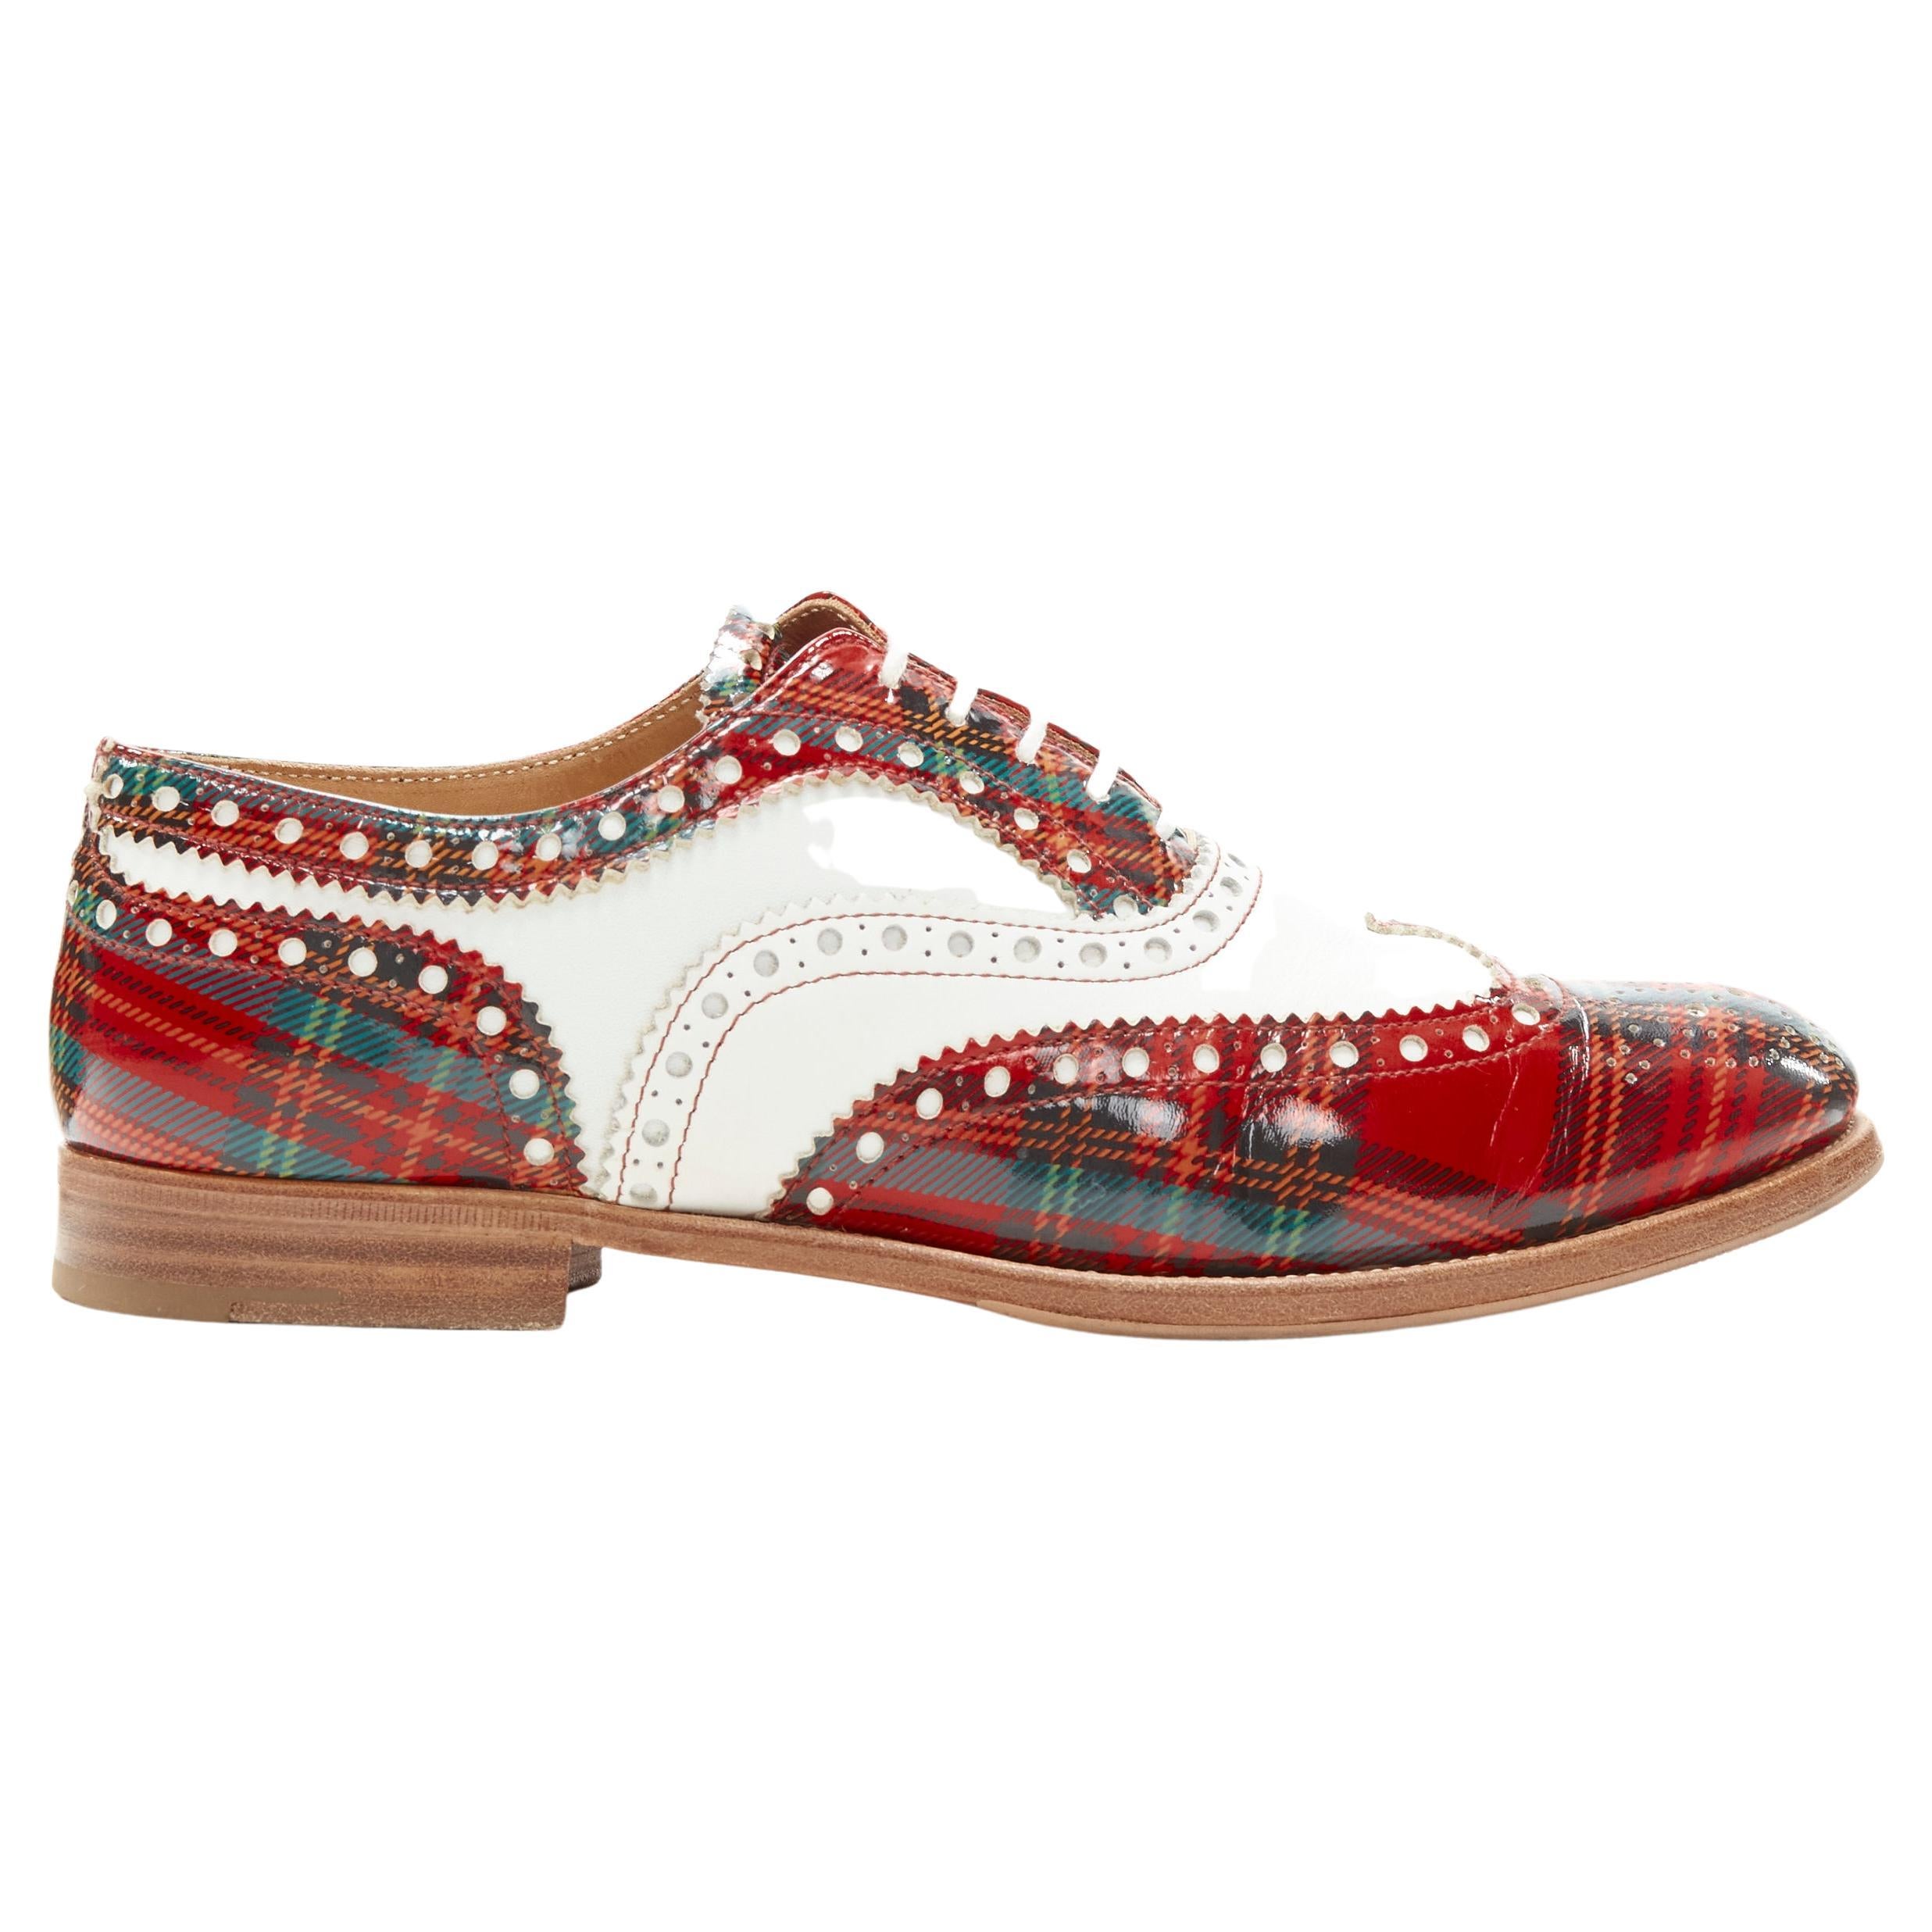 CHURCH'S Burwood red tartan patent white perforated leather brogue EU36.5 For Sale